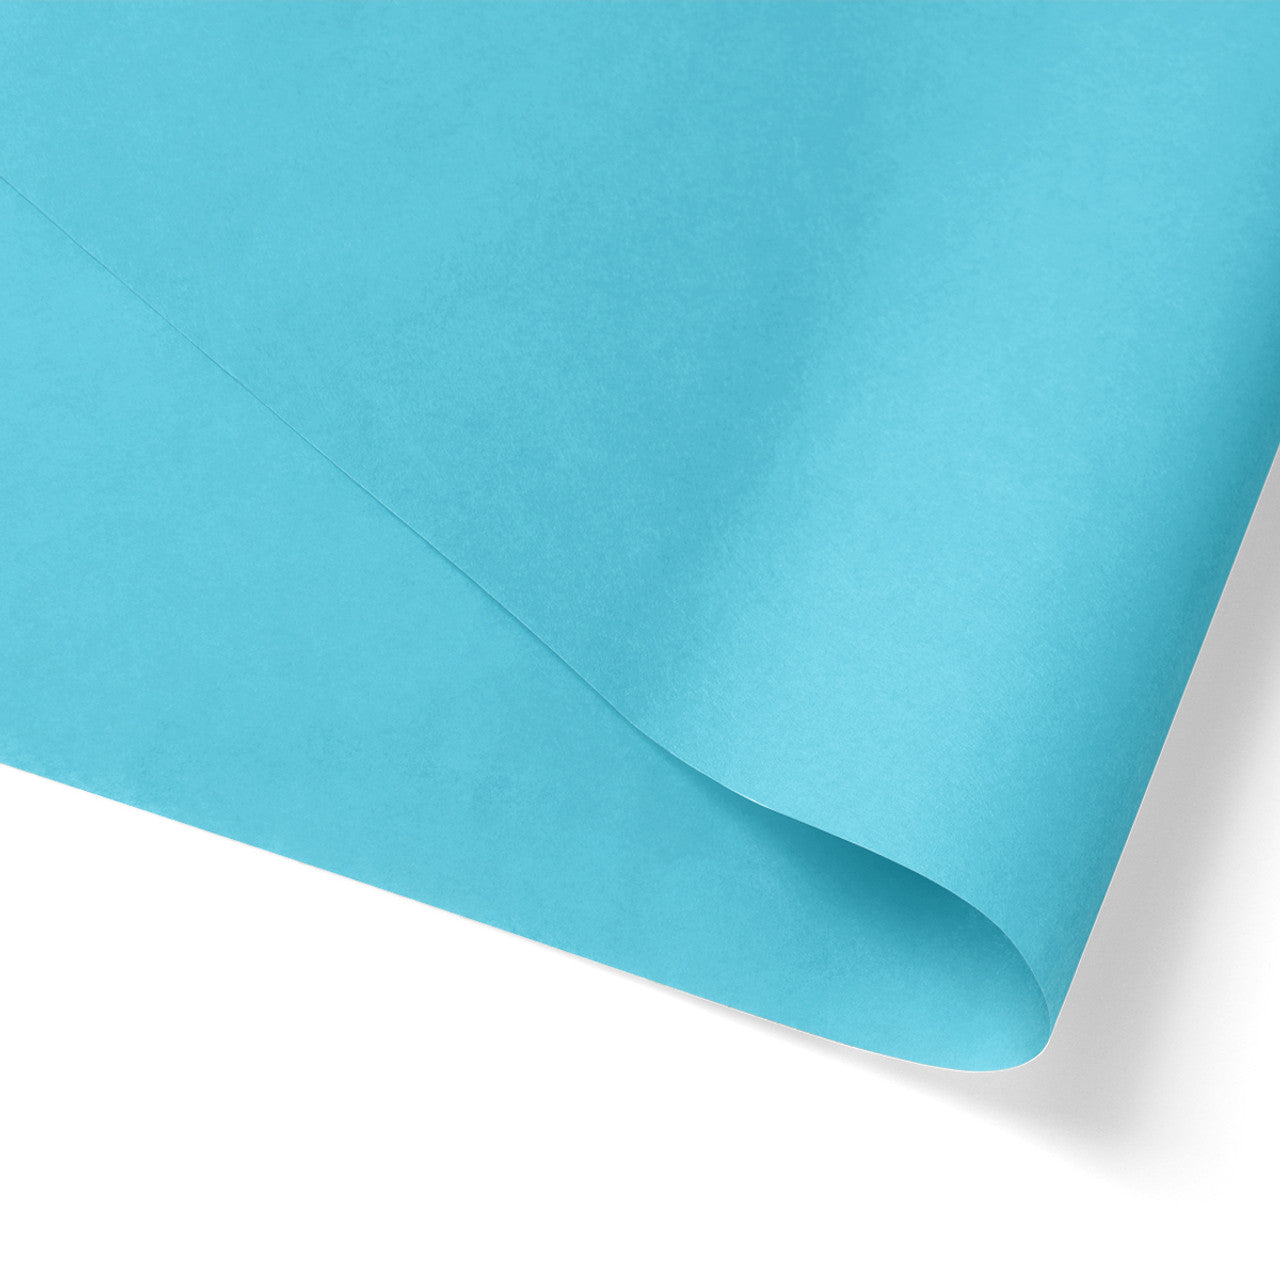 480pcs 20x30 inches Tiffany Solid Tissue Paper; $0.05/pc